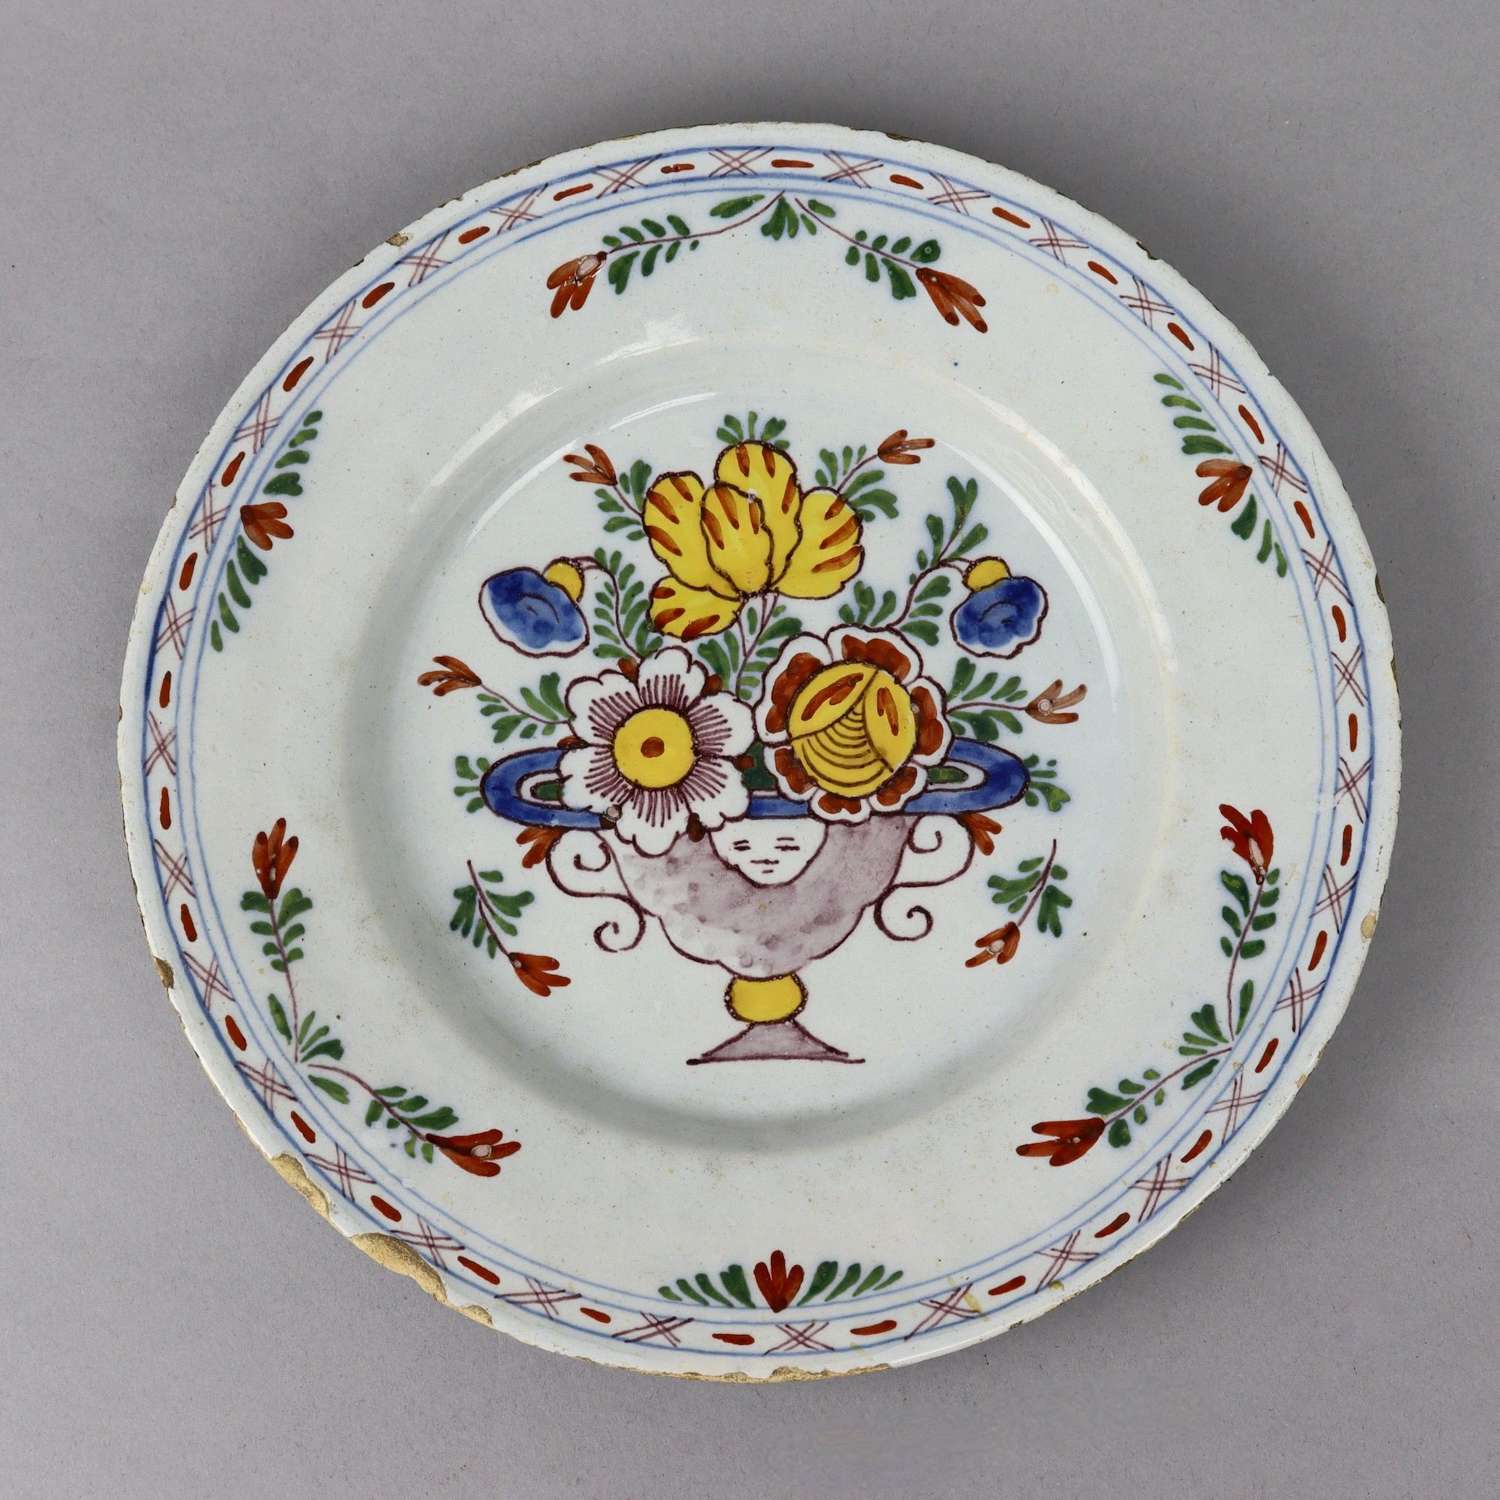 Delft Plate Painted with a Vase of Flowers